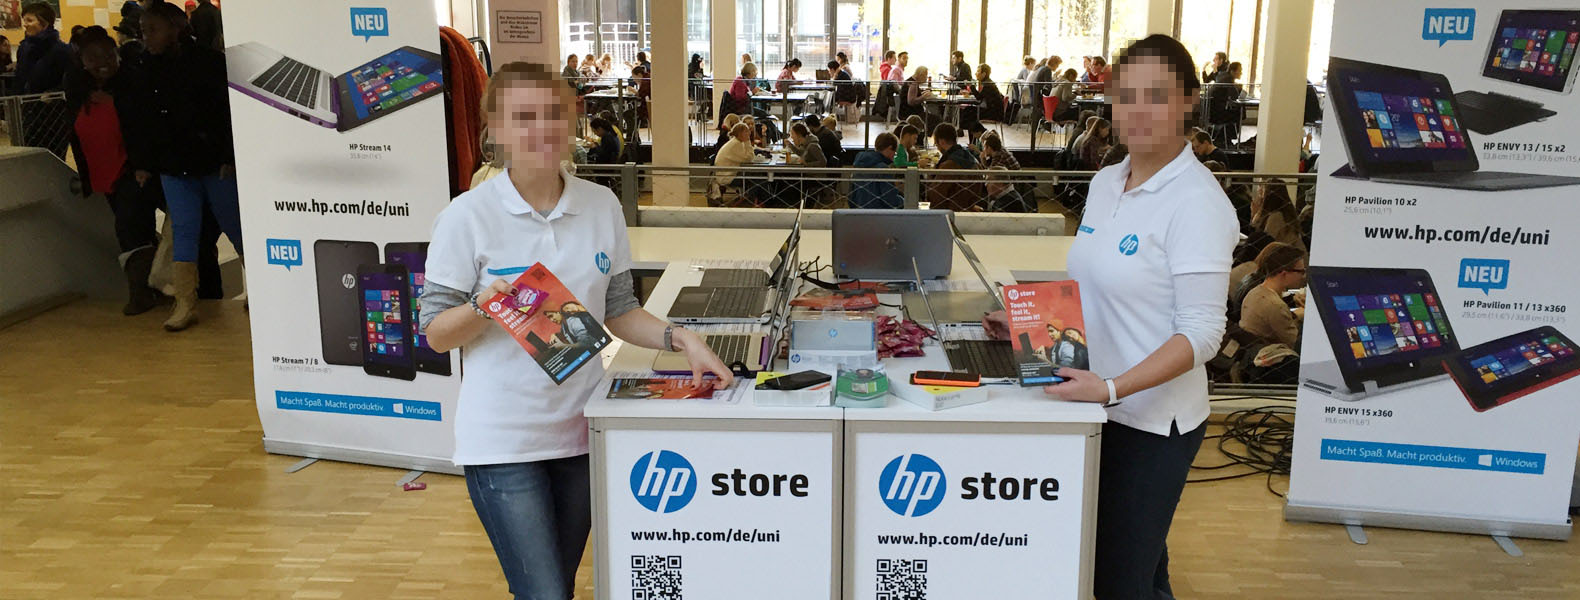 CAMPUS-Promotion HP